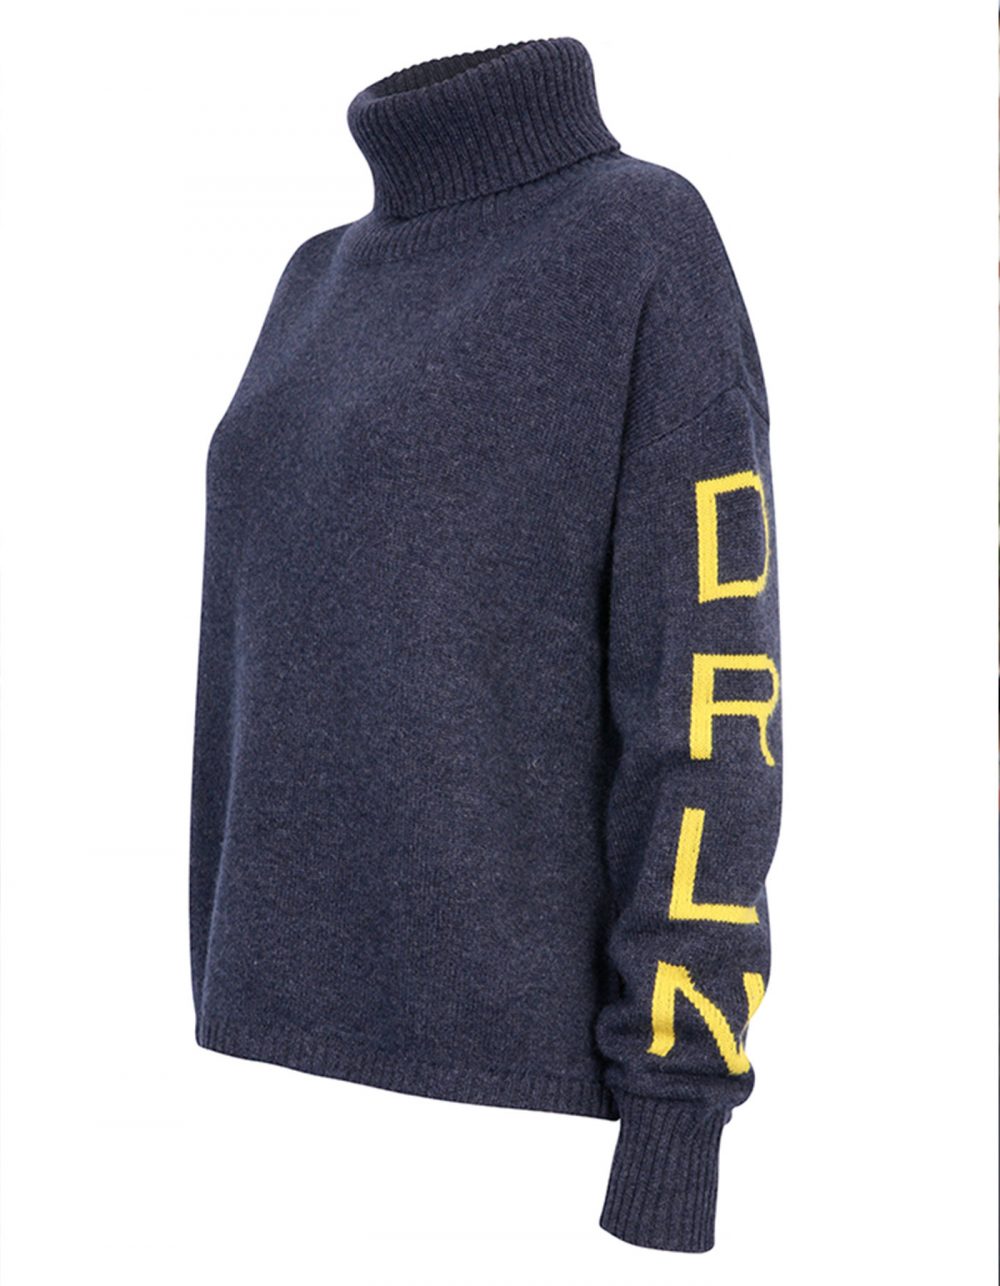 An image of malin darlin womens jumpers, the signature DRLN oversized cashmere jumper against a white background.